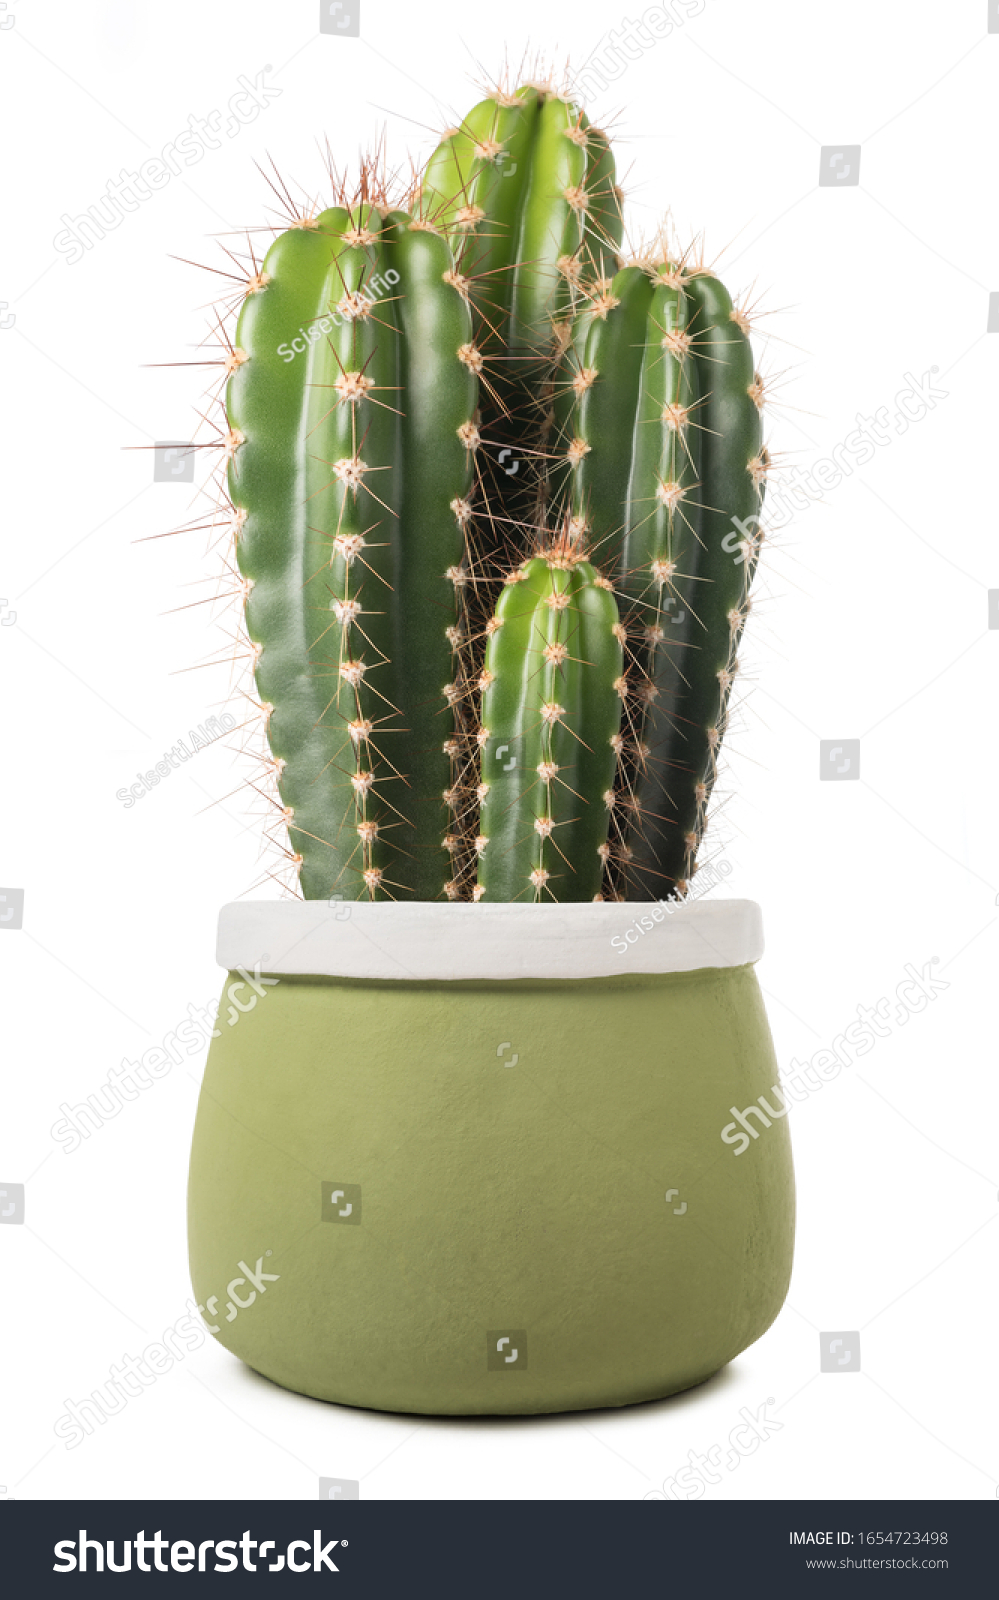  cactus in a vase isolated on white background  #1654723498